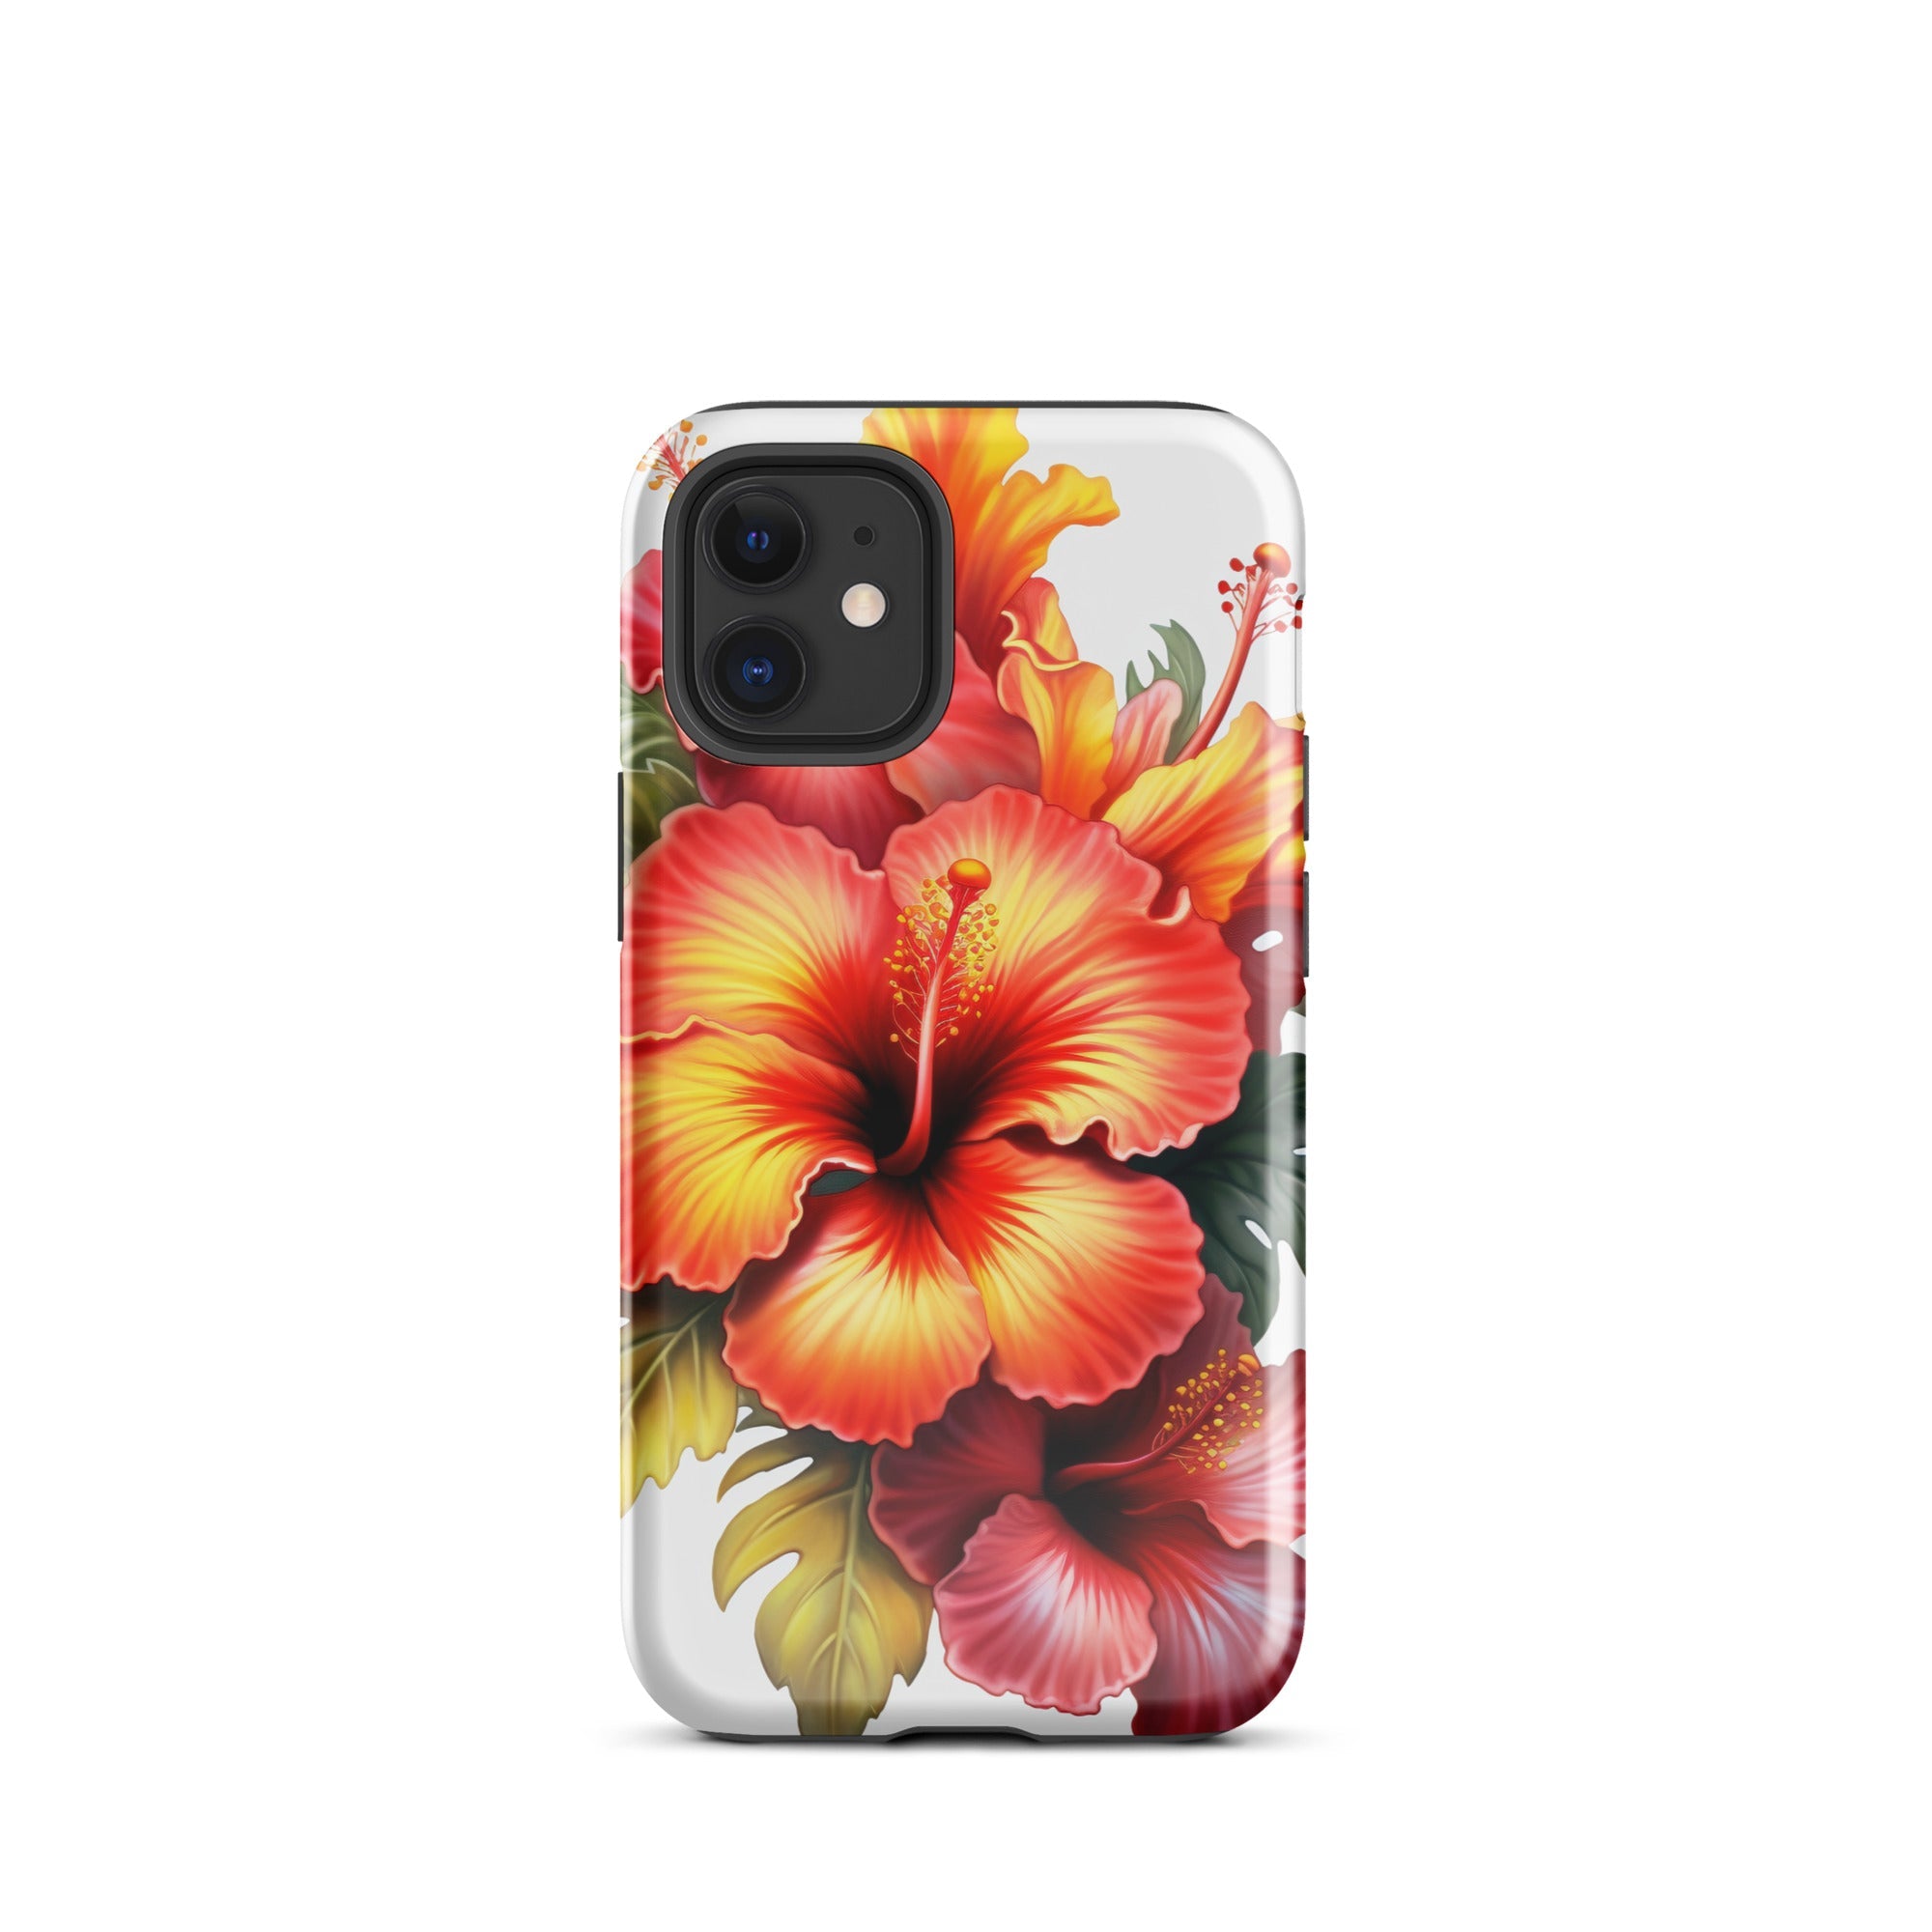 Hibiscus Flower iPhone Case by Visual Verse - Image 7